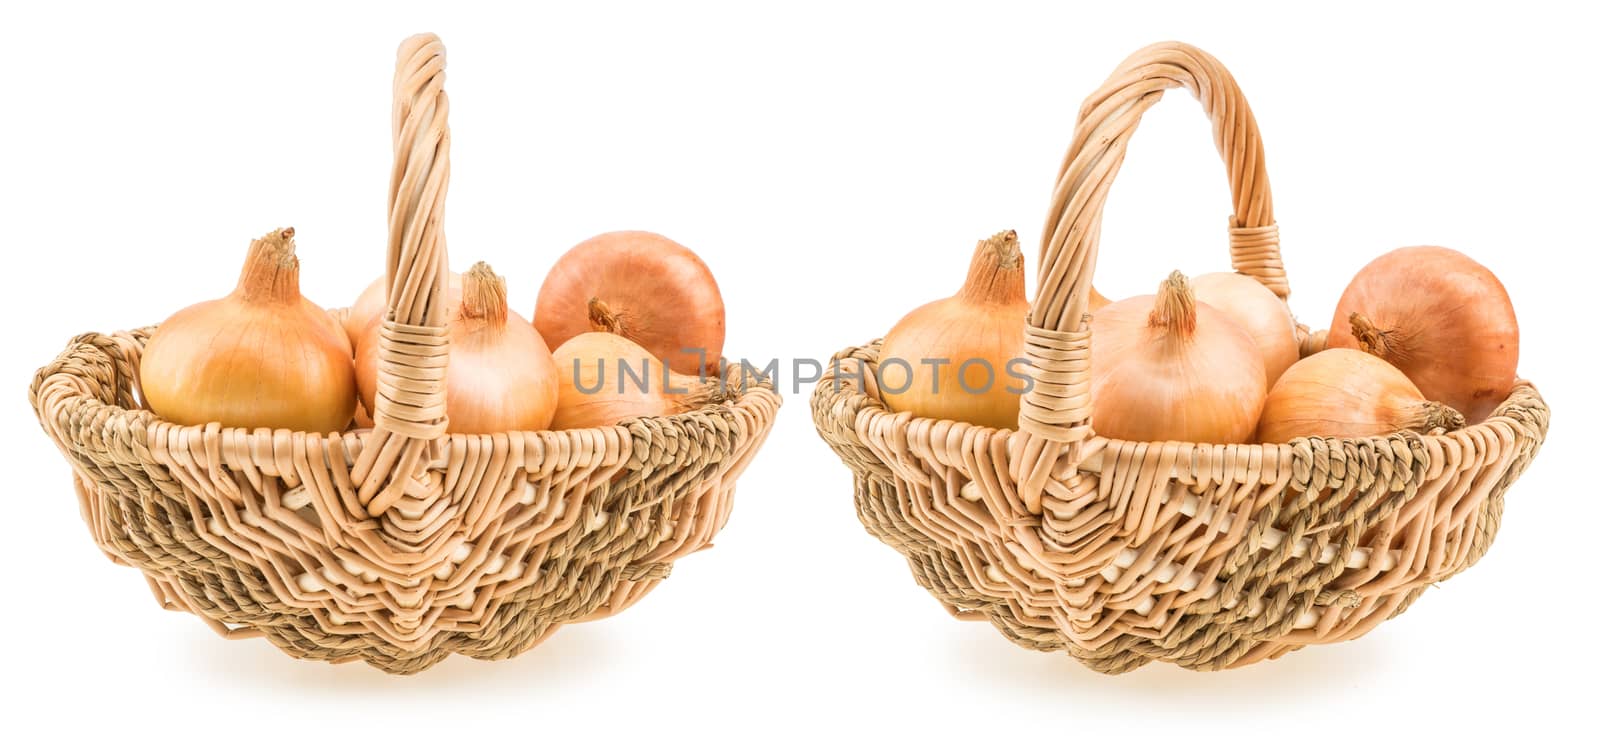 onions in a basket isolated on white background. by DGolbay